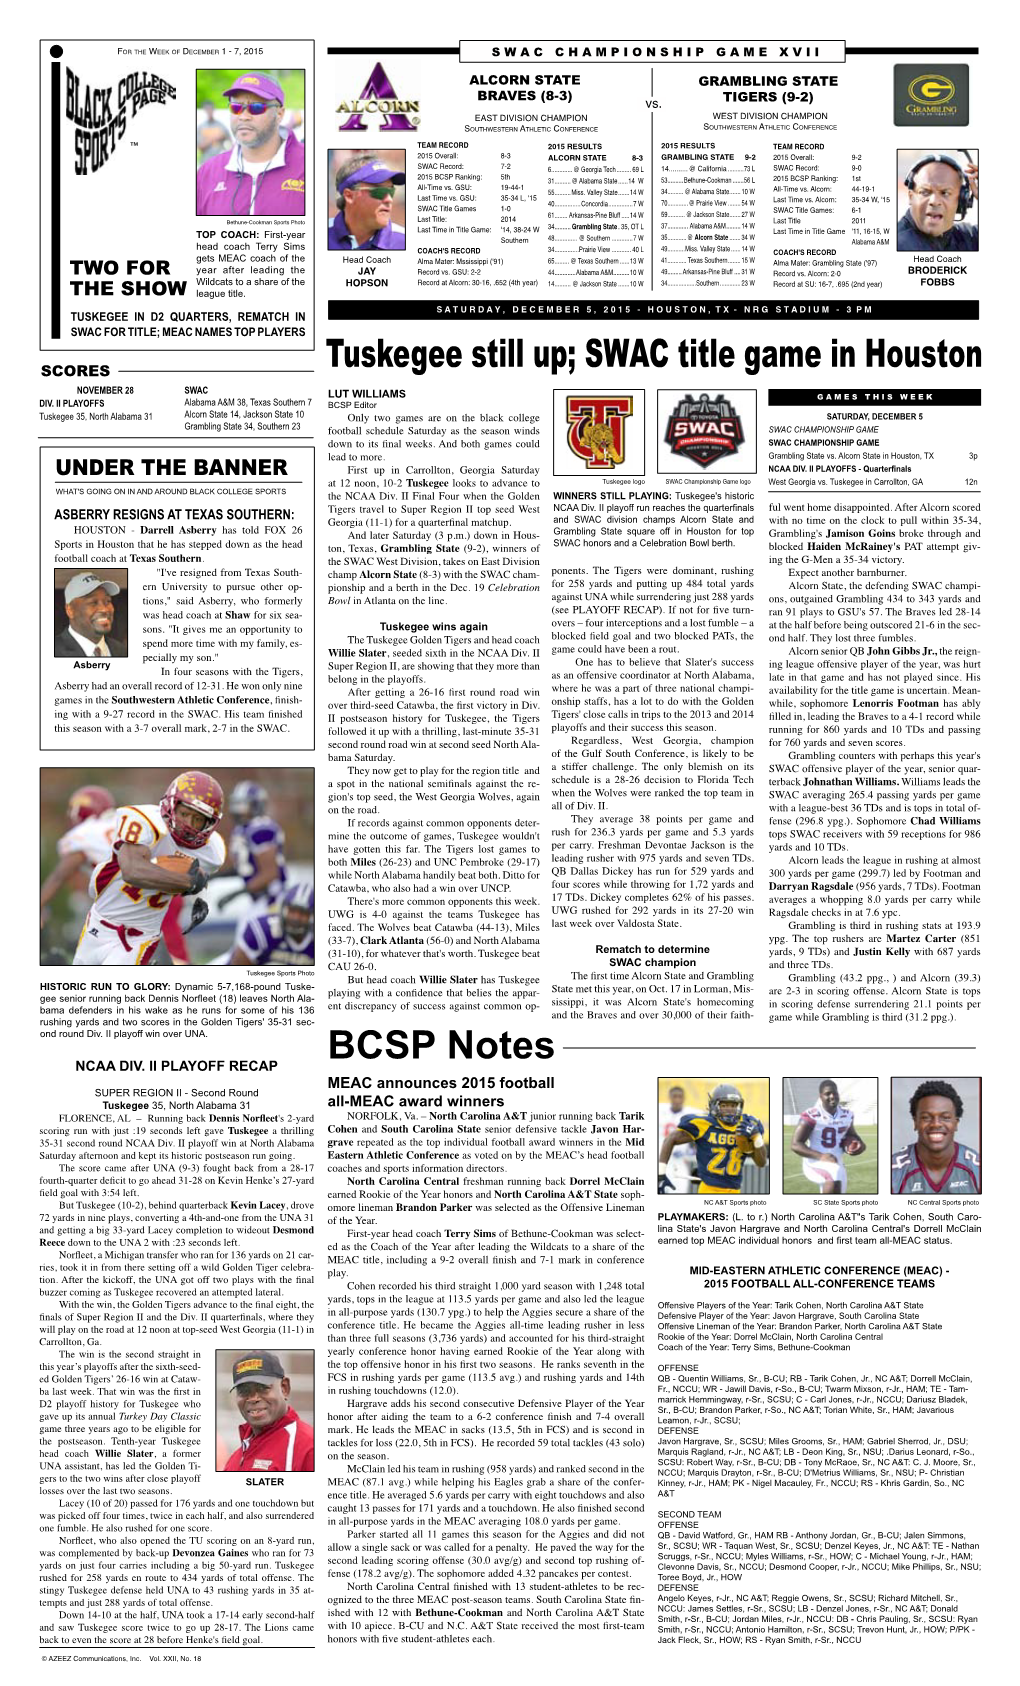 Tuskegee Still Up; SWAC Title Game in Houston BCSP Notes